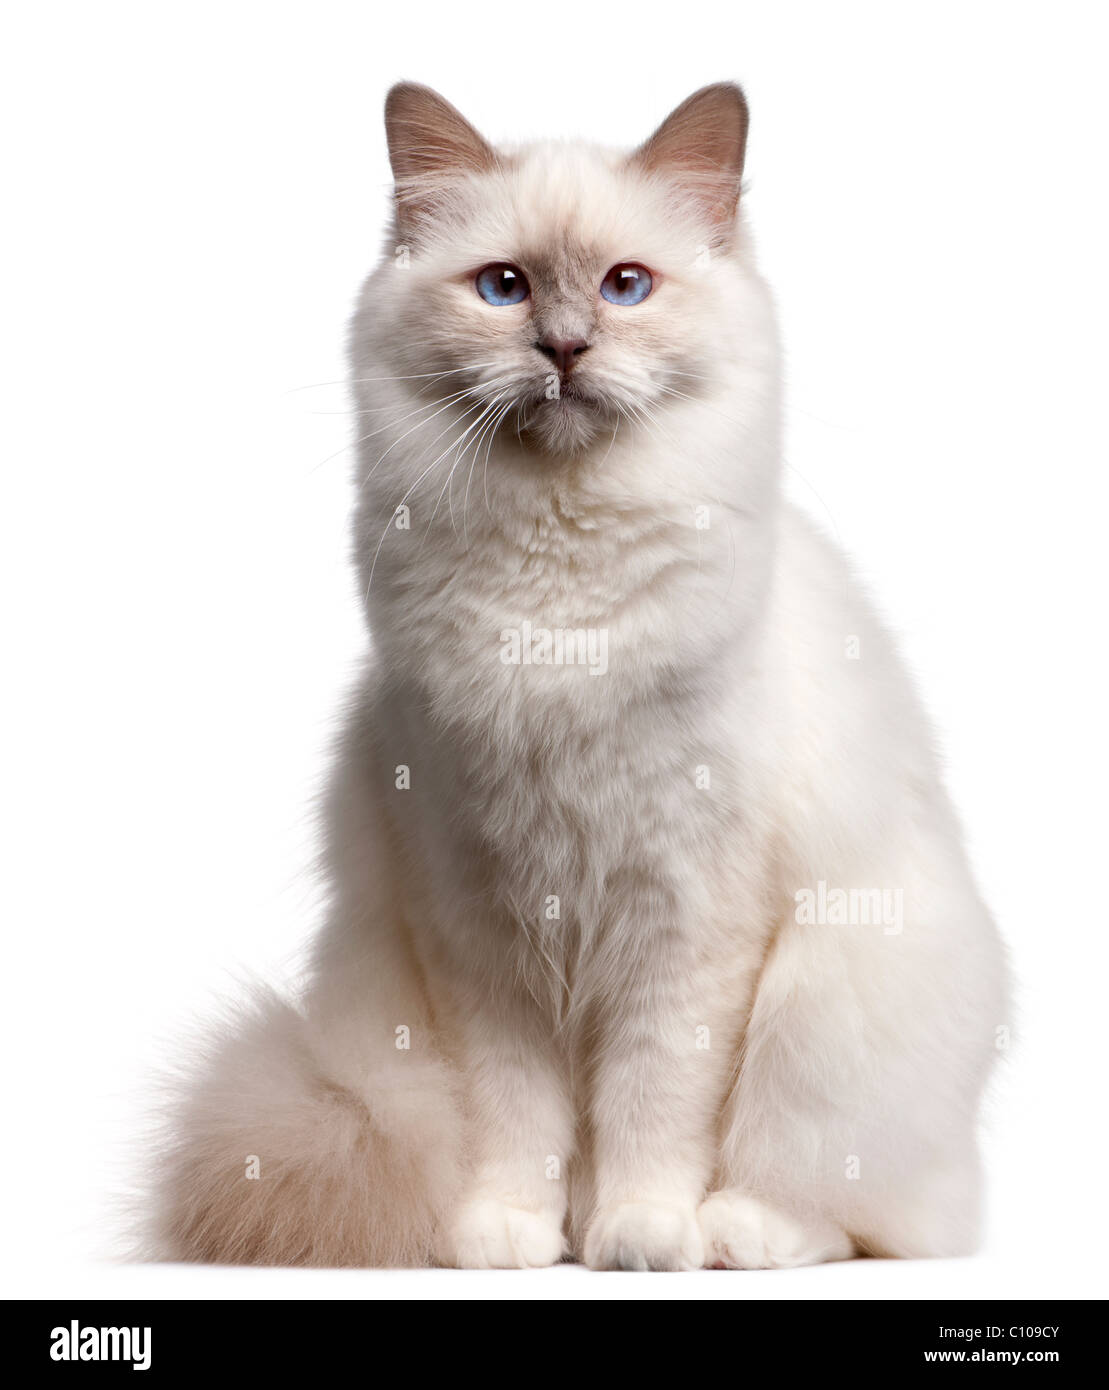 Birman cat, 9 months old, in front of white background Stock Photo